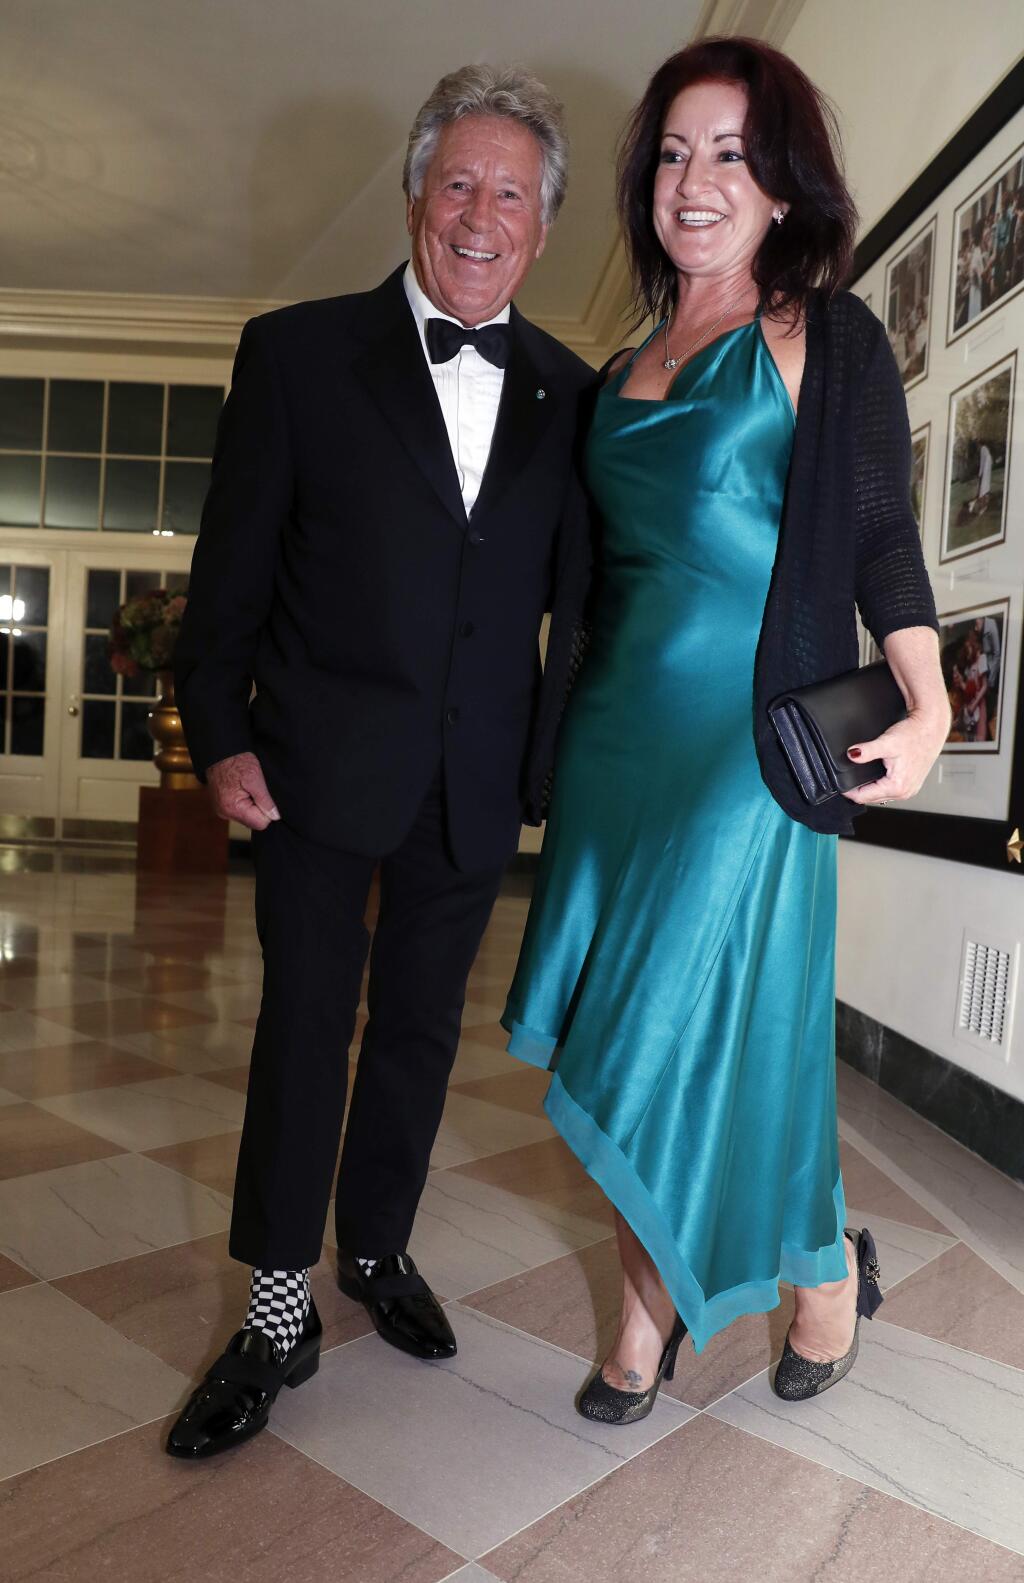 Former racing driver Mario Andretti shows his racing themed socks as he and Barbra Andretti-Curto arrive for a state dinner at the White House for Italian Prime Minister Matteo Renzi, Tuesday, Oct. 18, 2016 in Washington. (AP Photo/Alex Brandon)